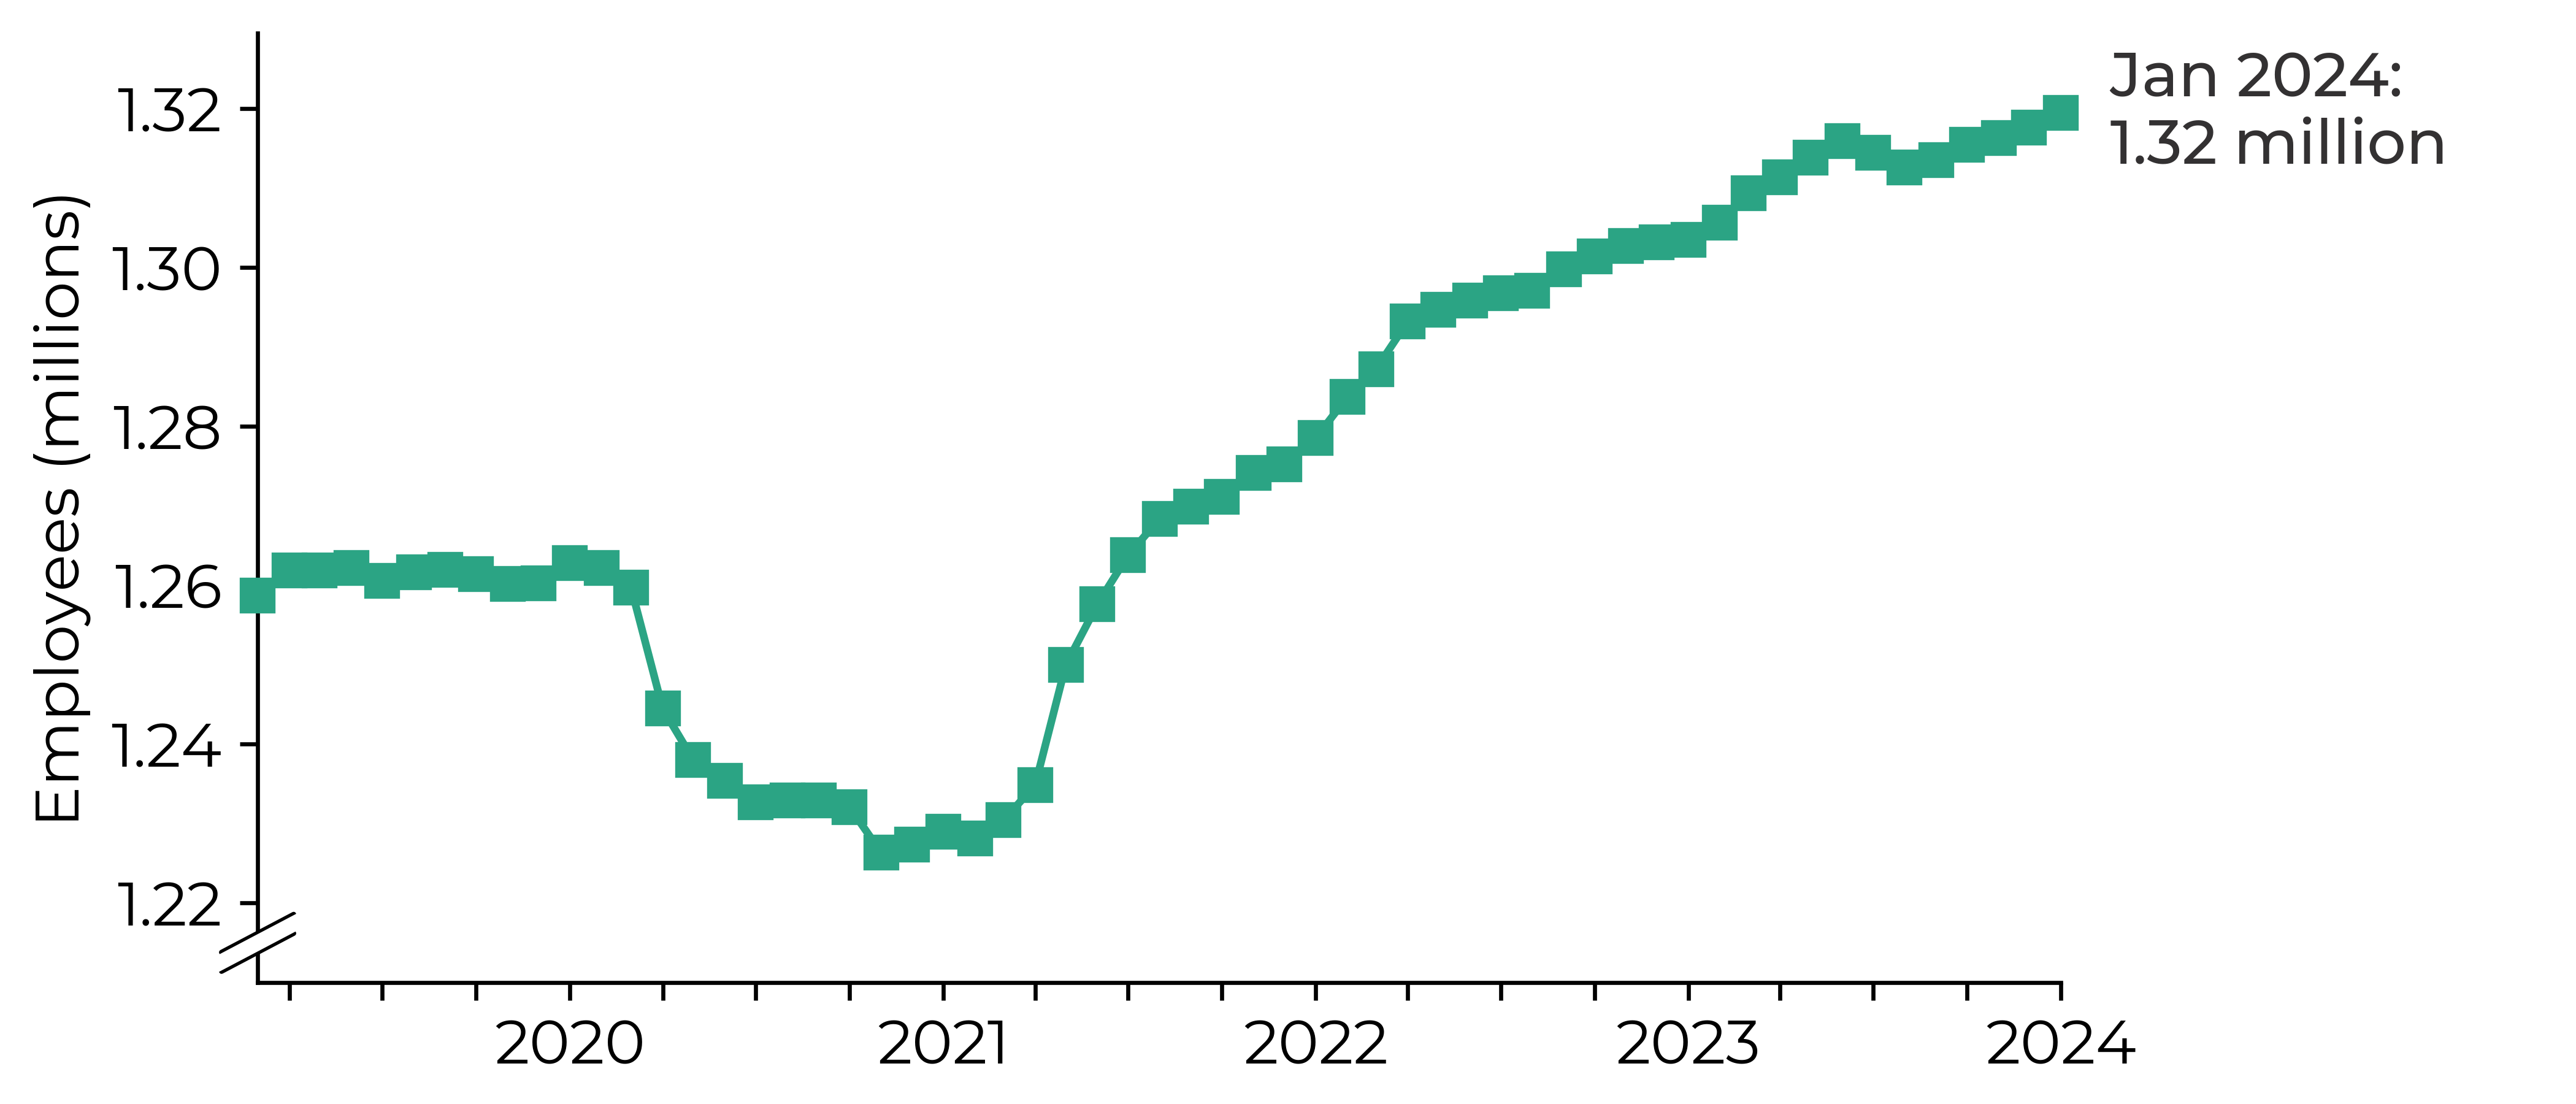 Graph showing a large dip in payrolled employees during the period March 2020 to March 2021 to under 1.23 million. This was followed by an increase to 1.32 million by January 2024.